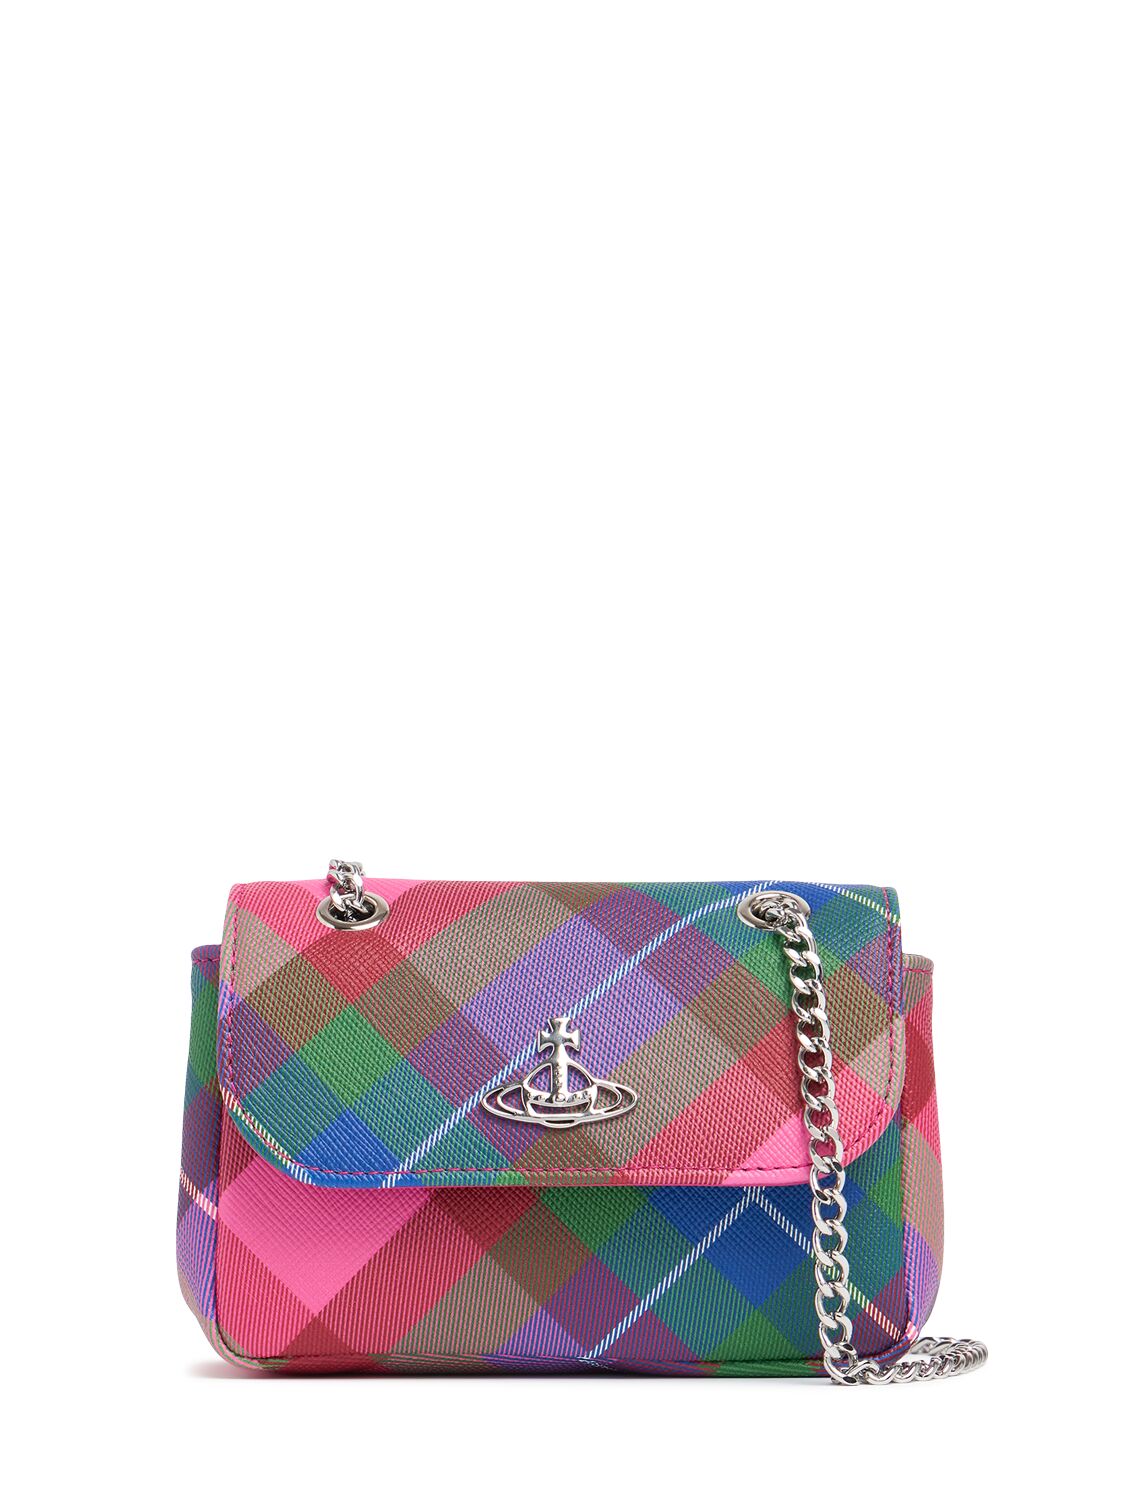 Vivienne Westwood Small Faux Leather Bag W/chain Strap In Candy Tartan